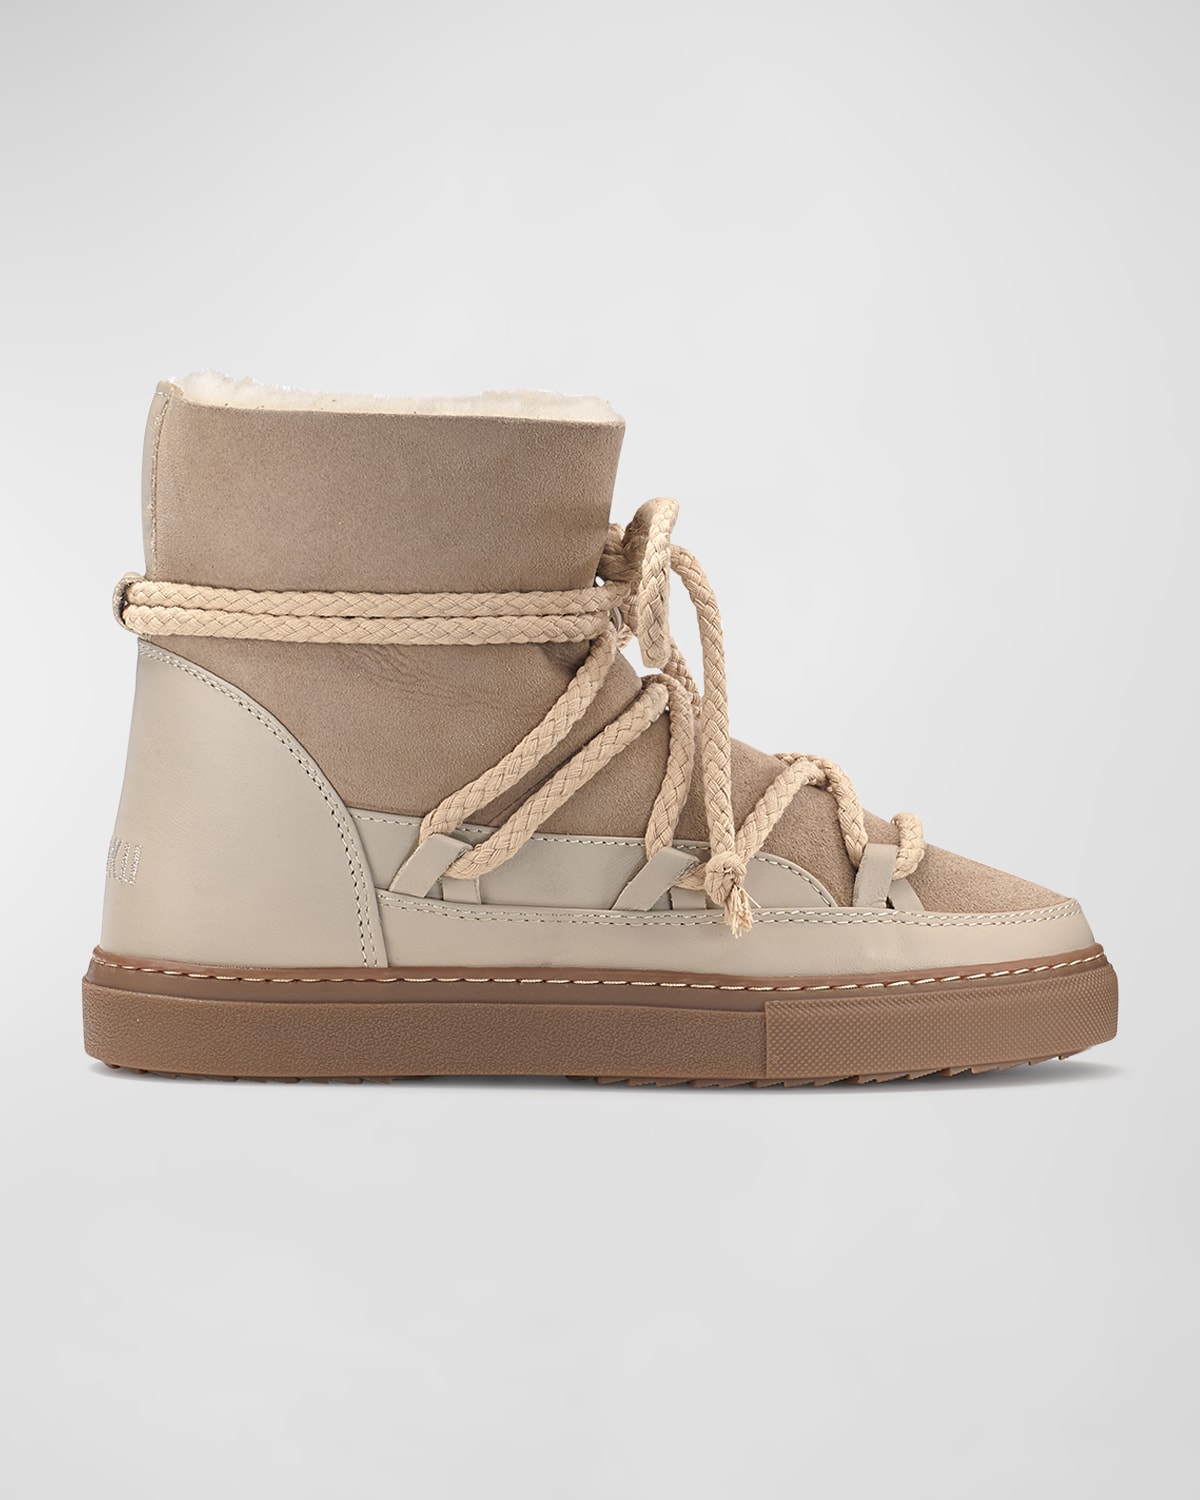 Shearling Lined Shoes | Neiman Marcus